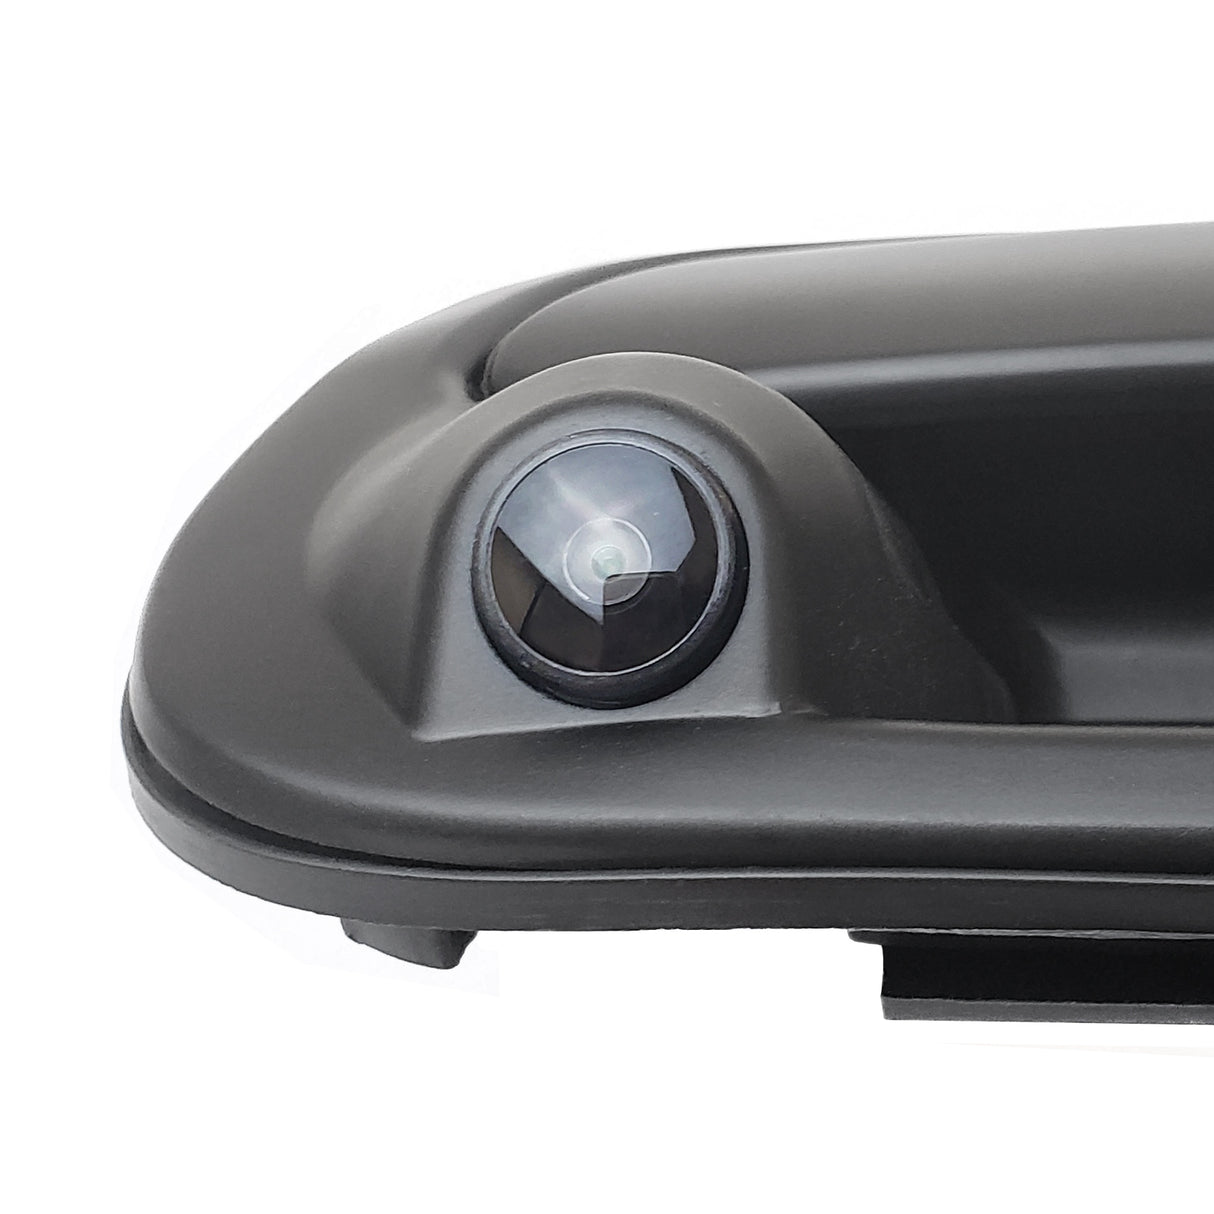 Toyota Tundra (2000-2006) Smooth Primed Black Replacement Tailgate Handle with Backup Camera (Ready to Paint)